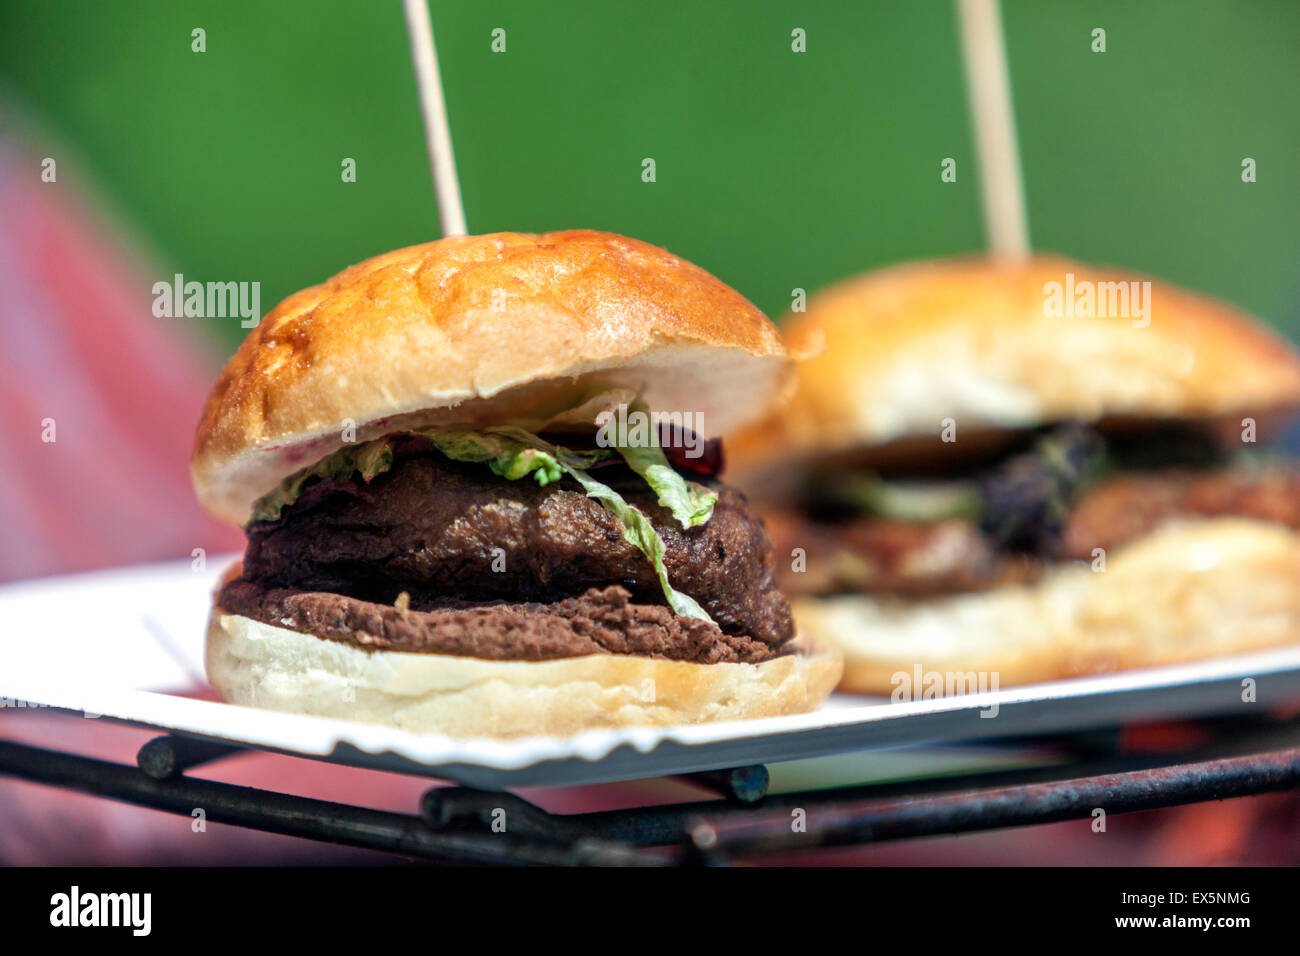 Two meat burgers on a stick, take away burger Stock Photo